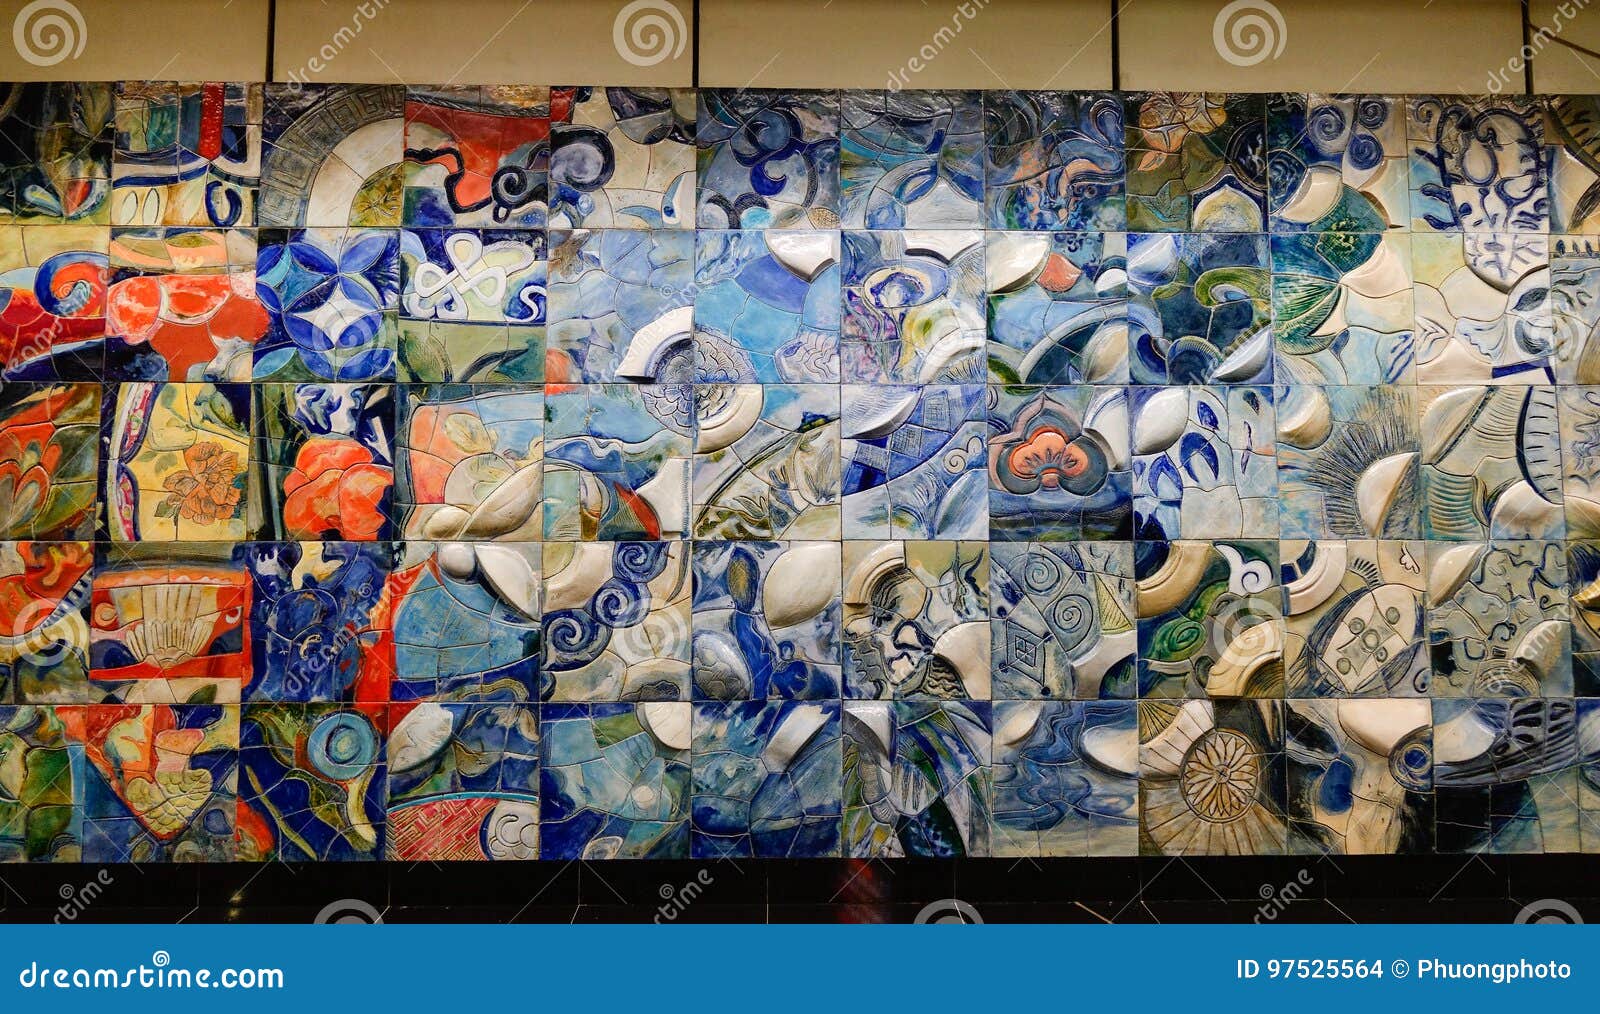 Ceramic Wall At Subway Station In Singapore Editorial Stock Image